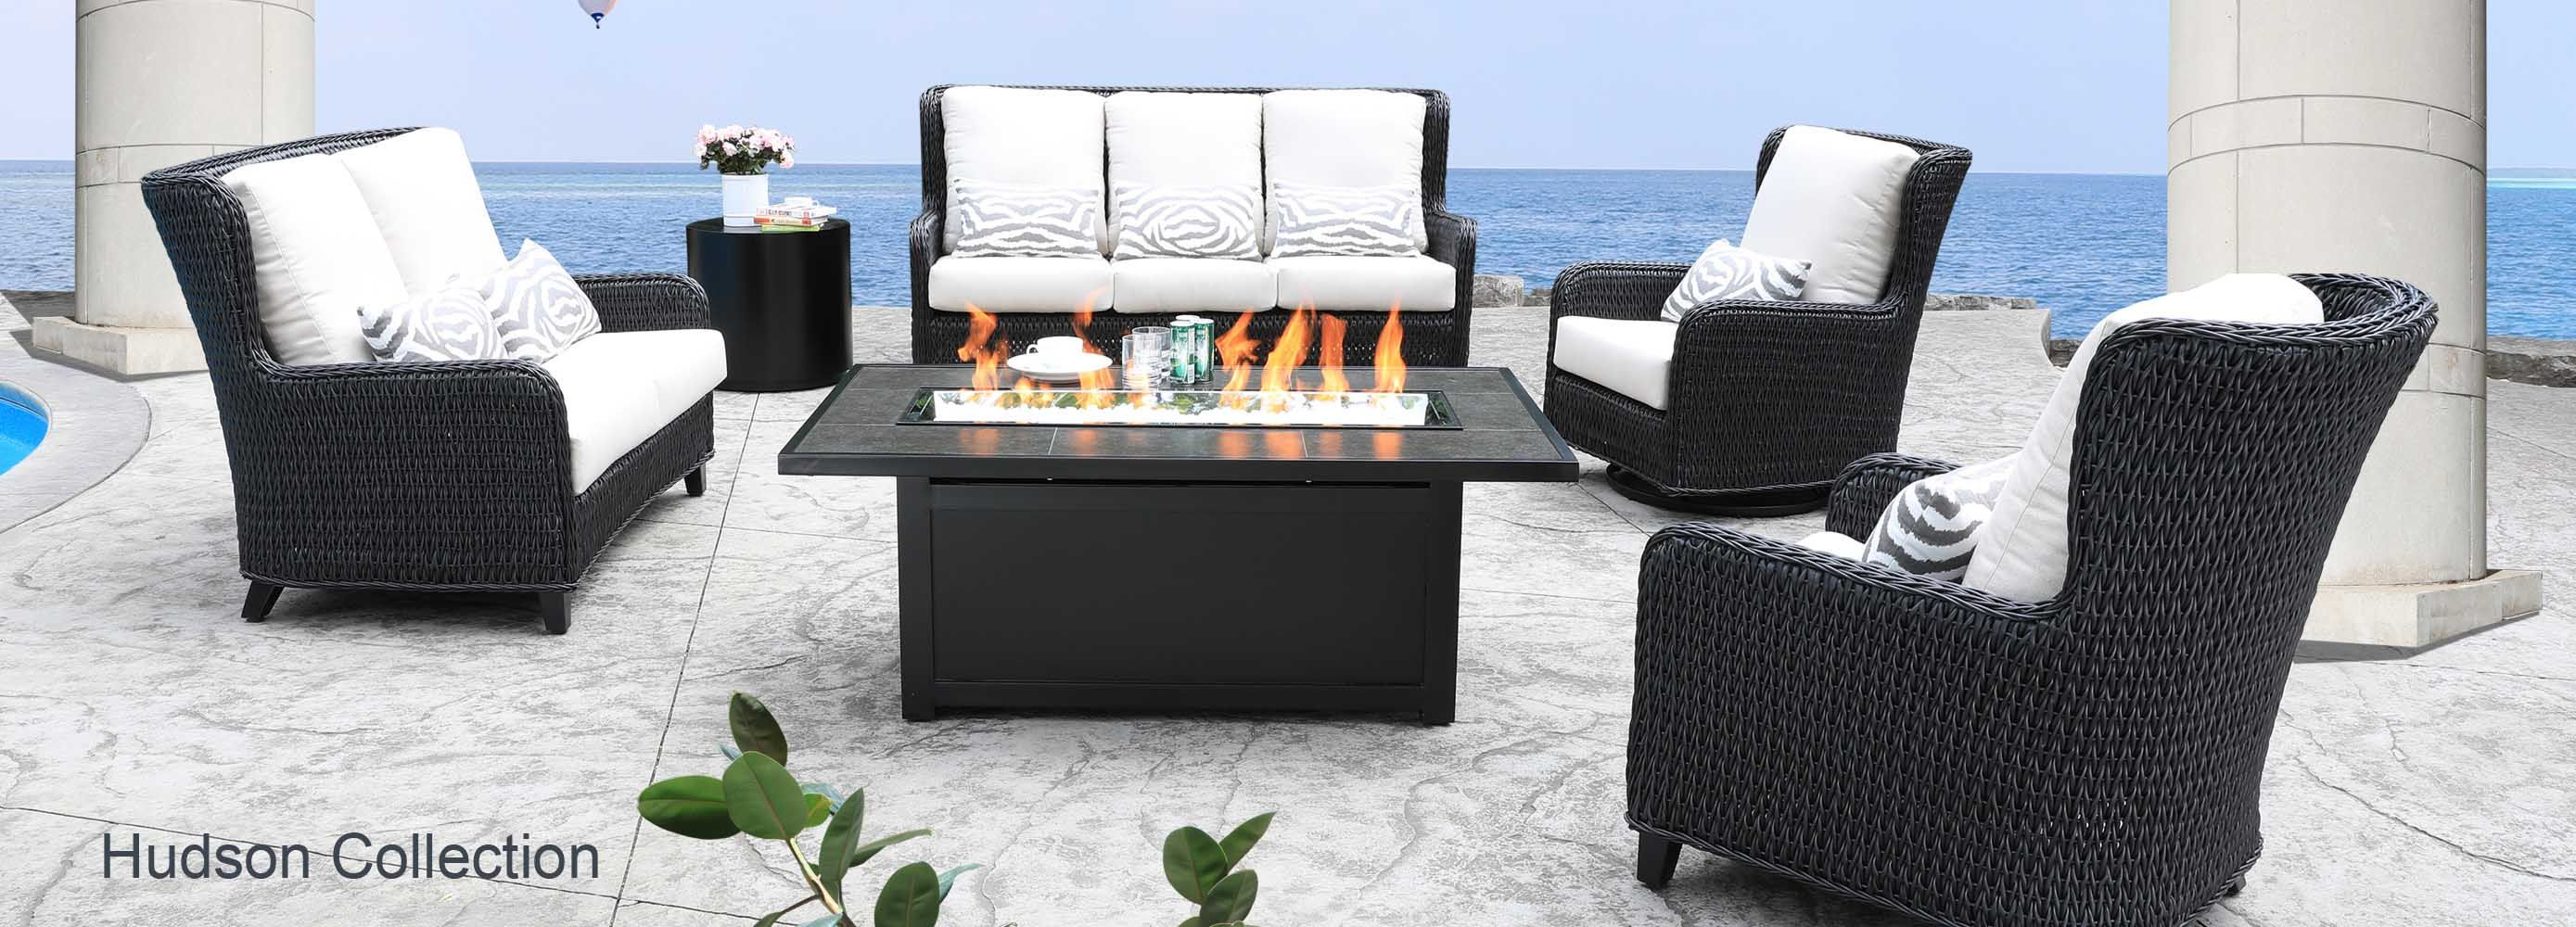 Comfortable Patio Furniture Canada Patio Ideas intended for sizing 2778 X 1000